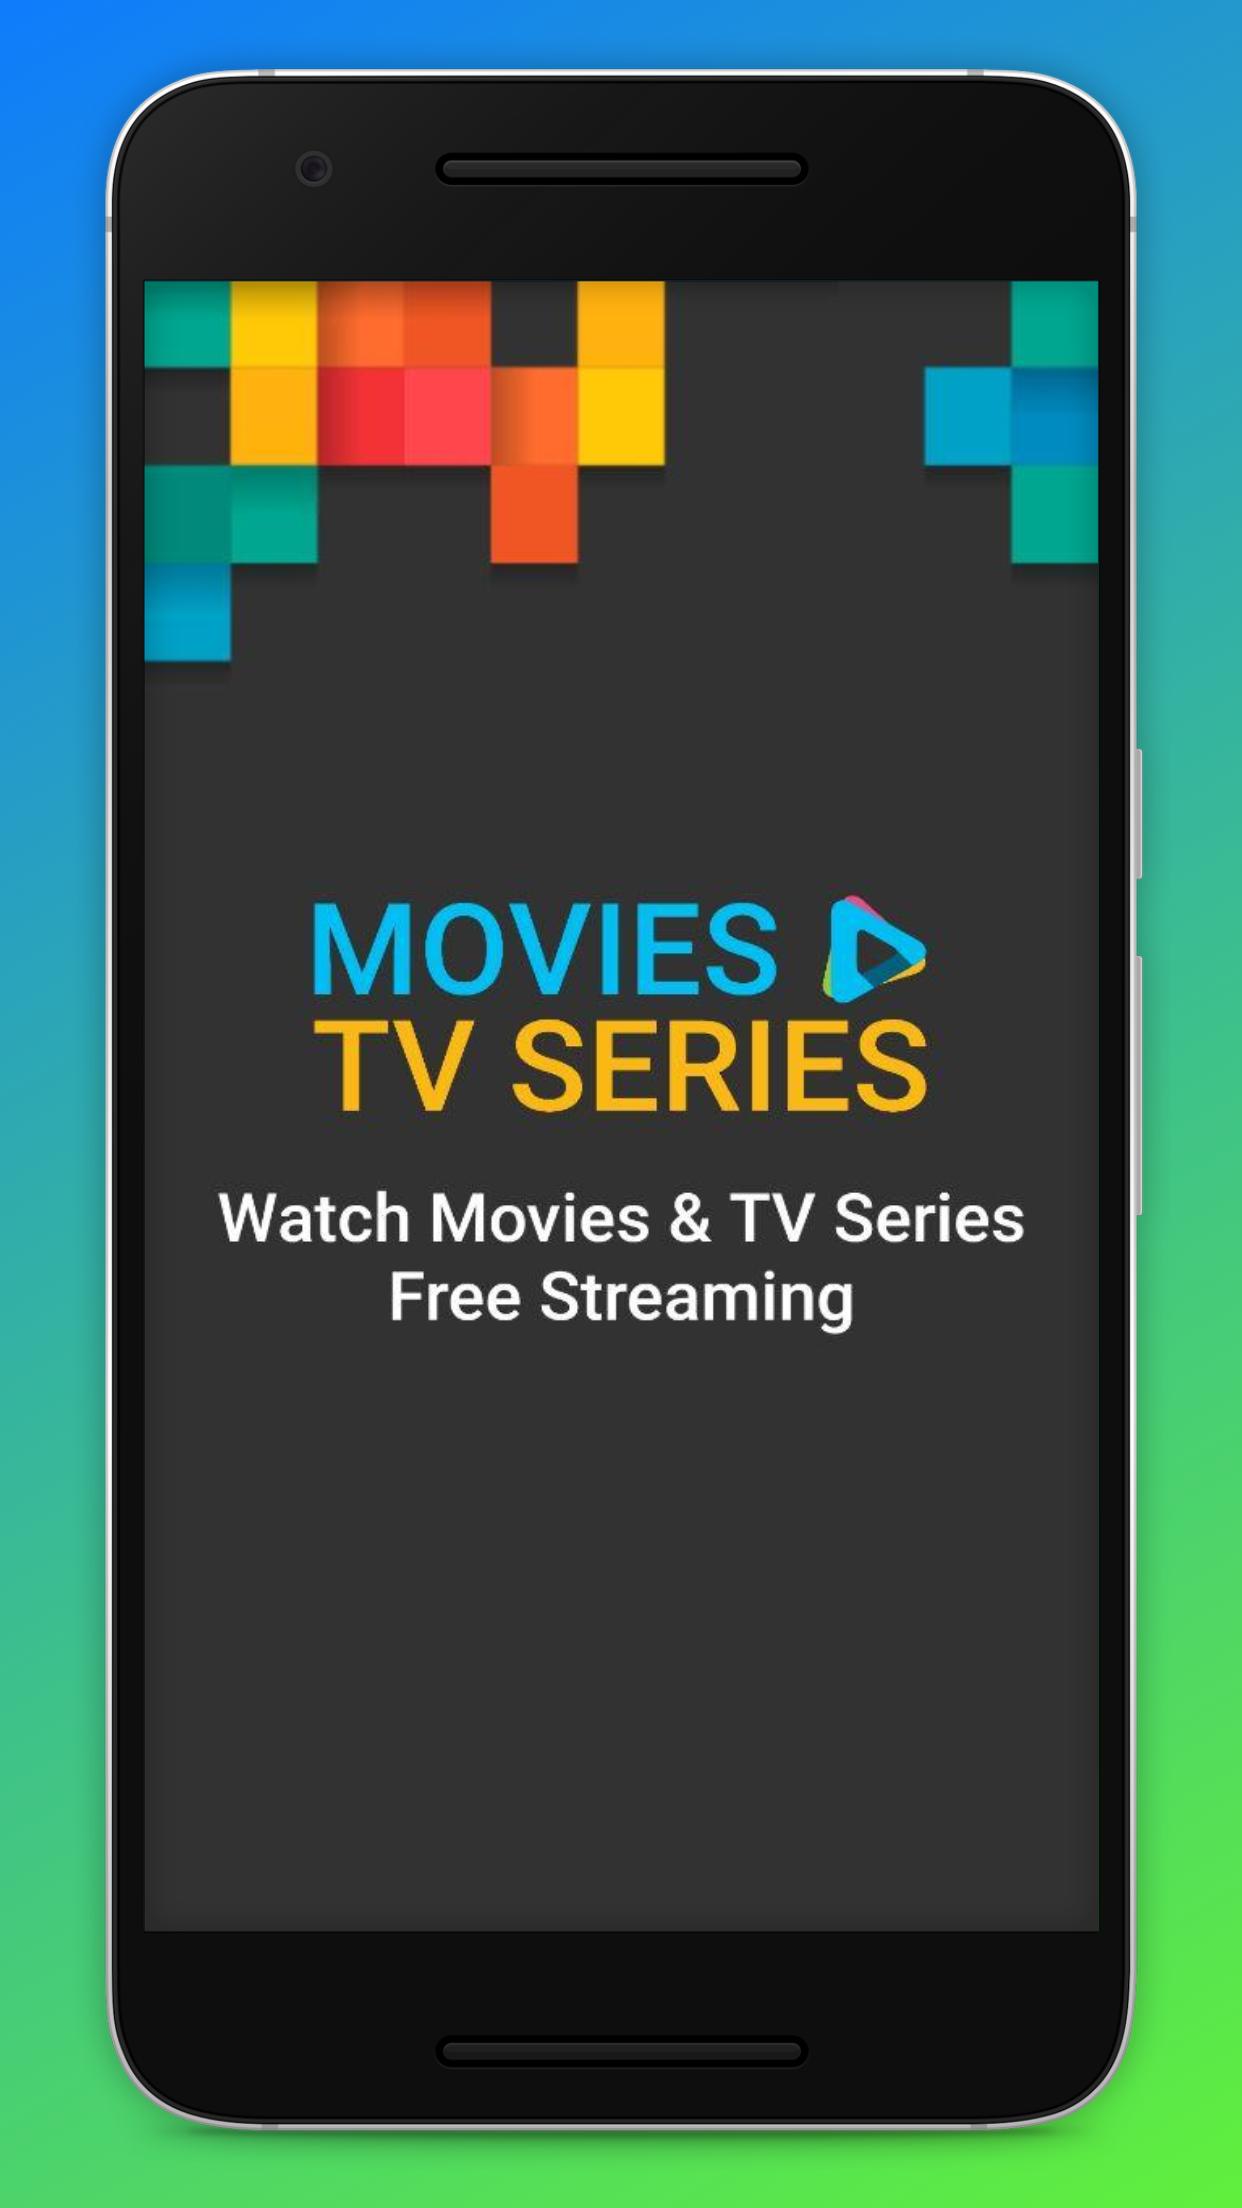 Watch Movies & TV Series Free Streaming for Android - APK Download